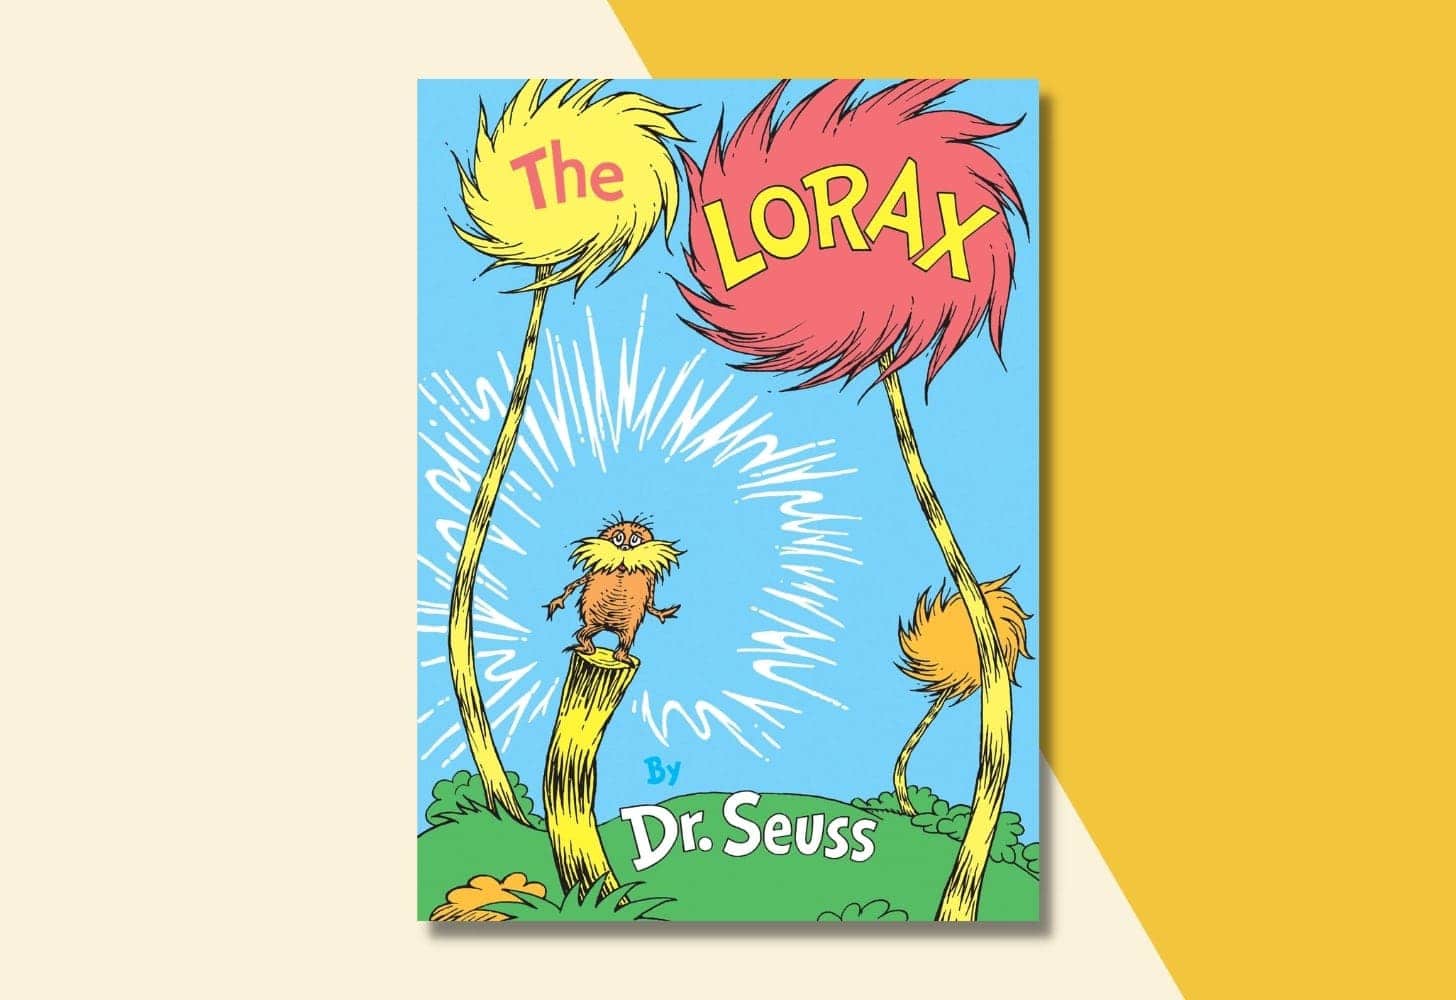 “The Lorax” by Dr. Seuss